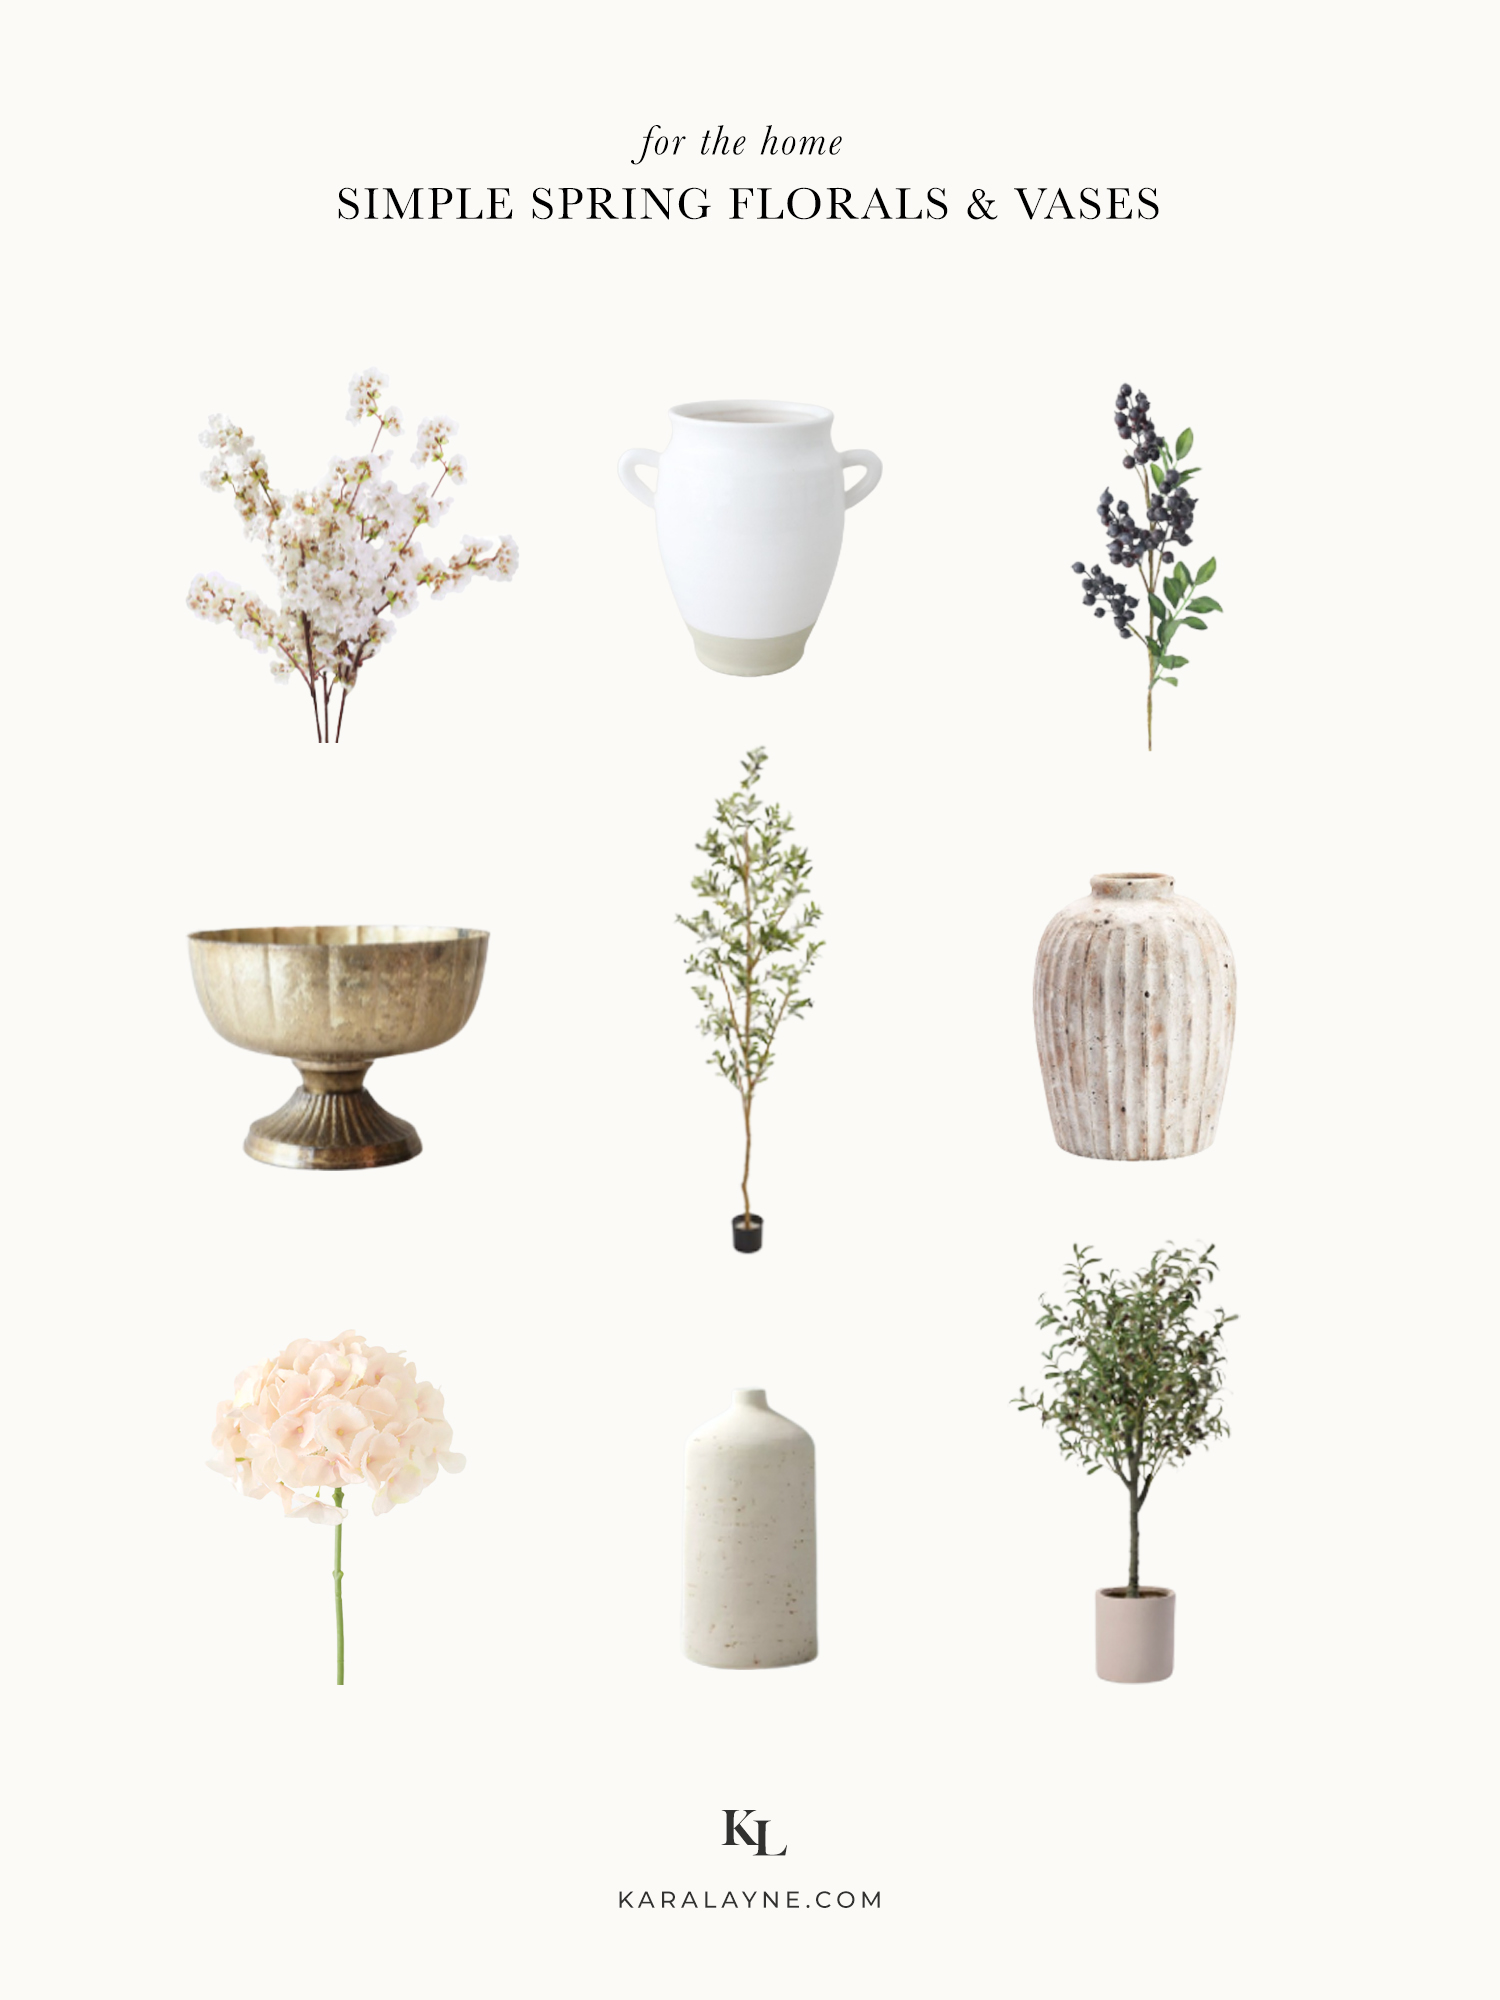 I am sharing simple spring floral inspiration and the best faux stems I have discovered. I love approaching the change of seasons in a simple way. Just a few faux spring stems or spring greens can do so much to invite the new season into your space and make things feel fresh. Catch more over on KaraLayne.com!